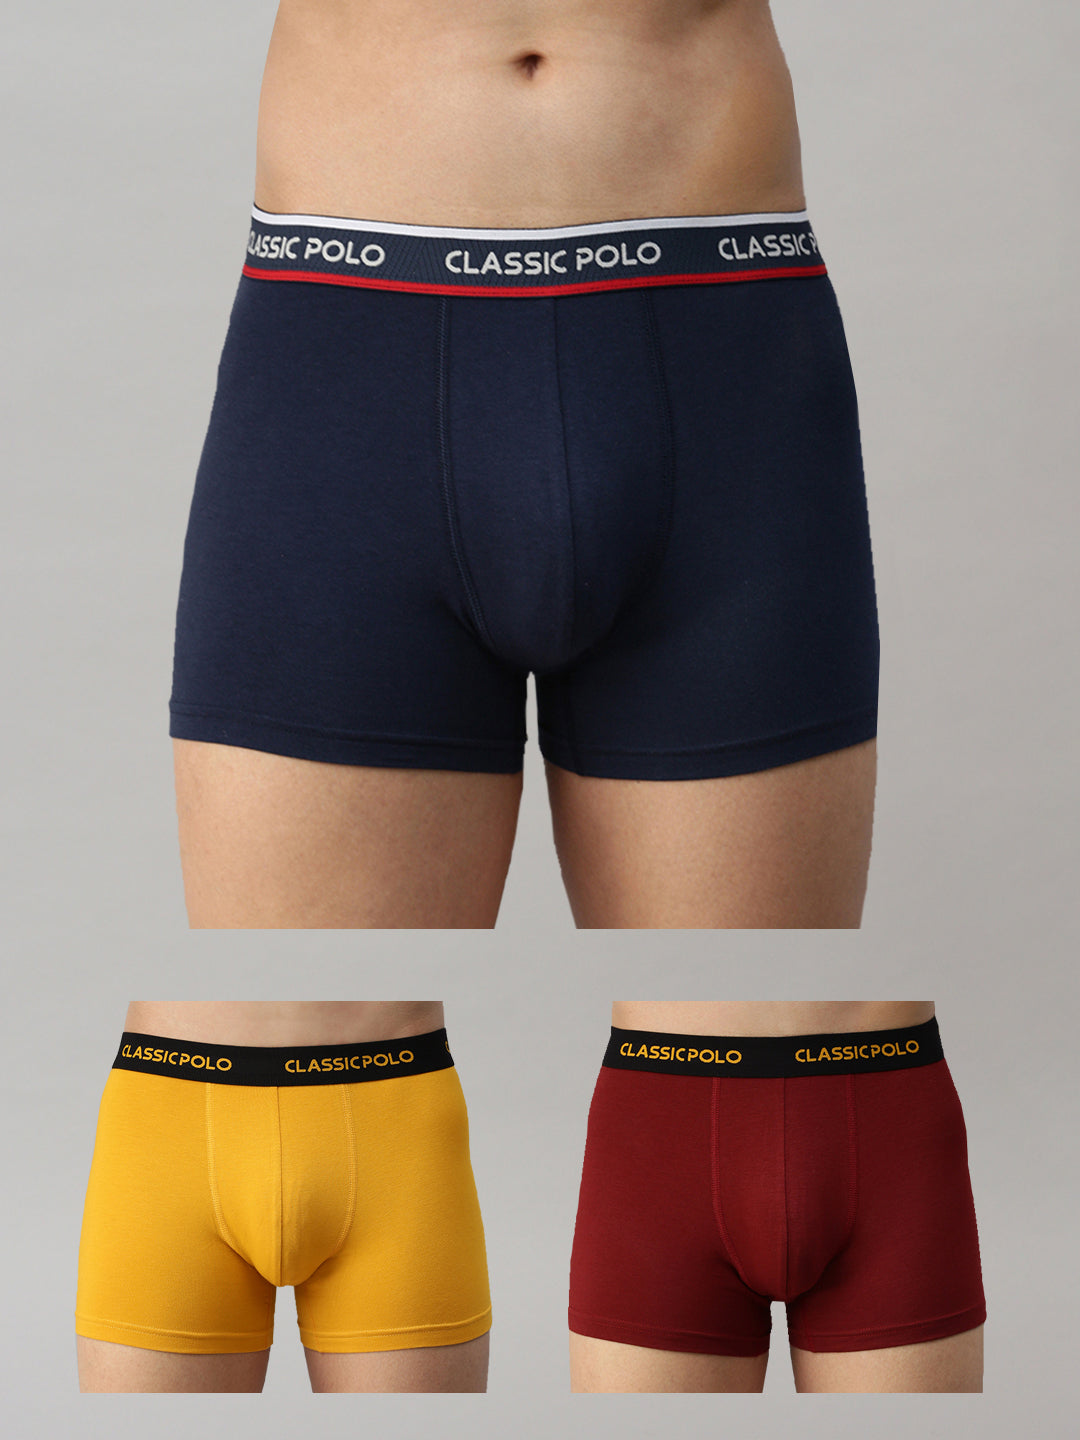 Classic Polo Men's Modal Solid Trunks | Glance - Multicolor (Pack of 3)